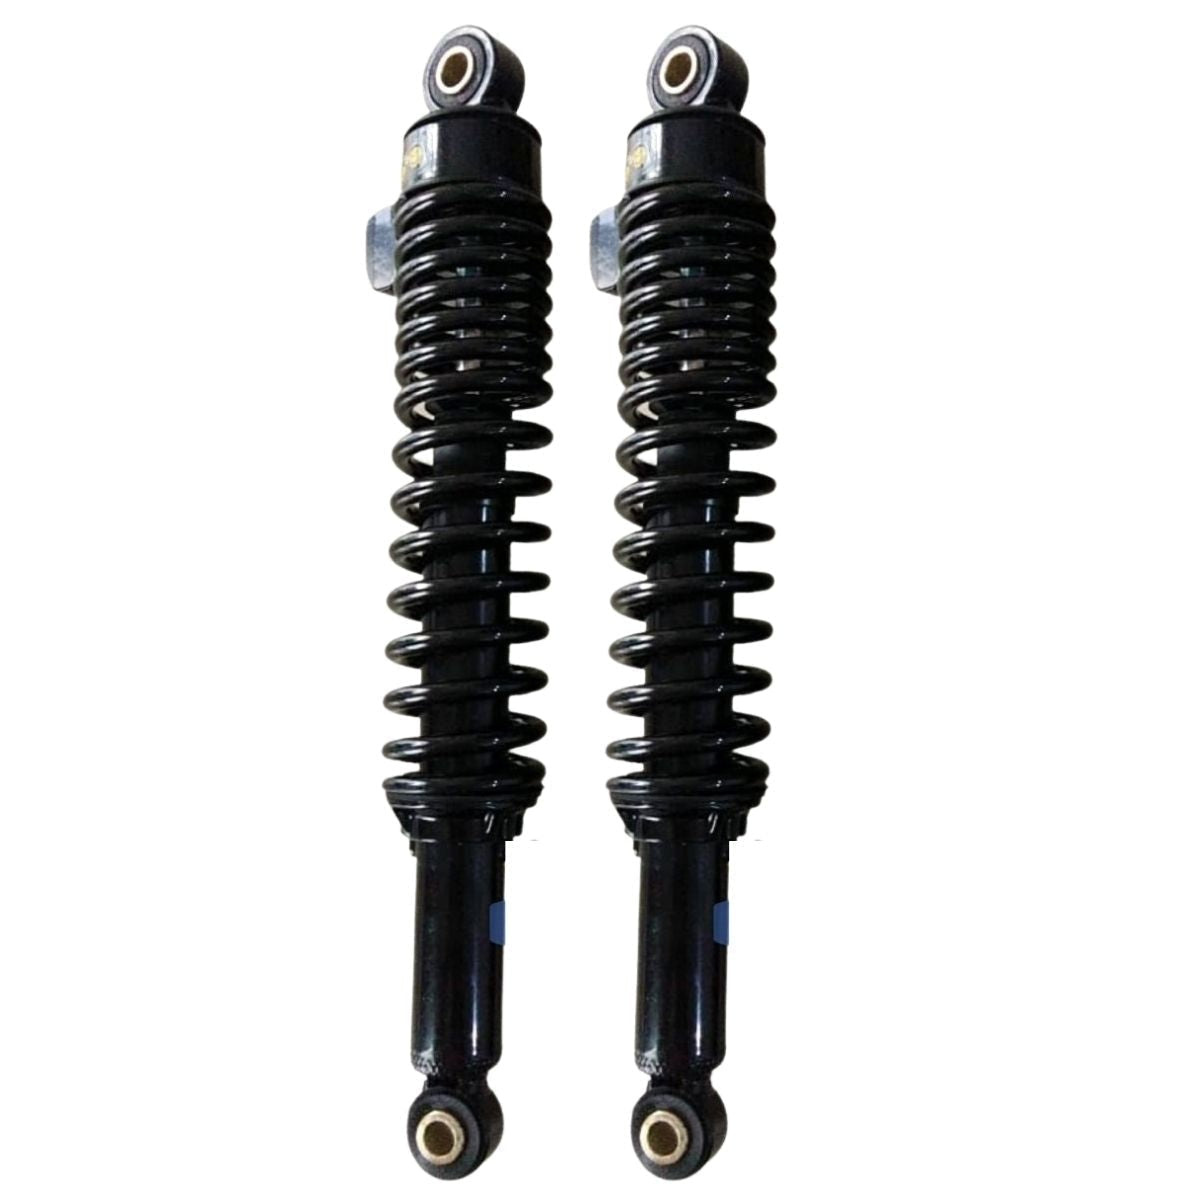 Royal Enfield Classic Rear Shock Absorber Shockers (1 pc